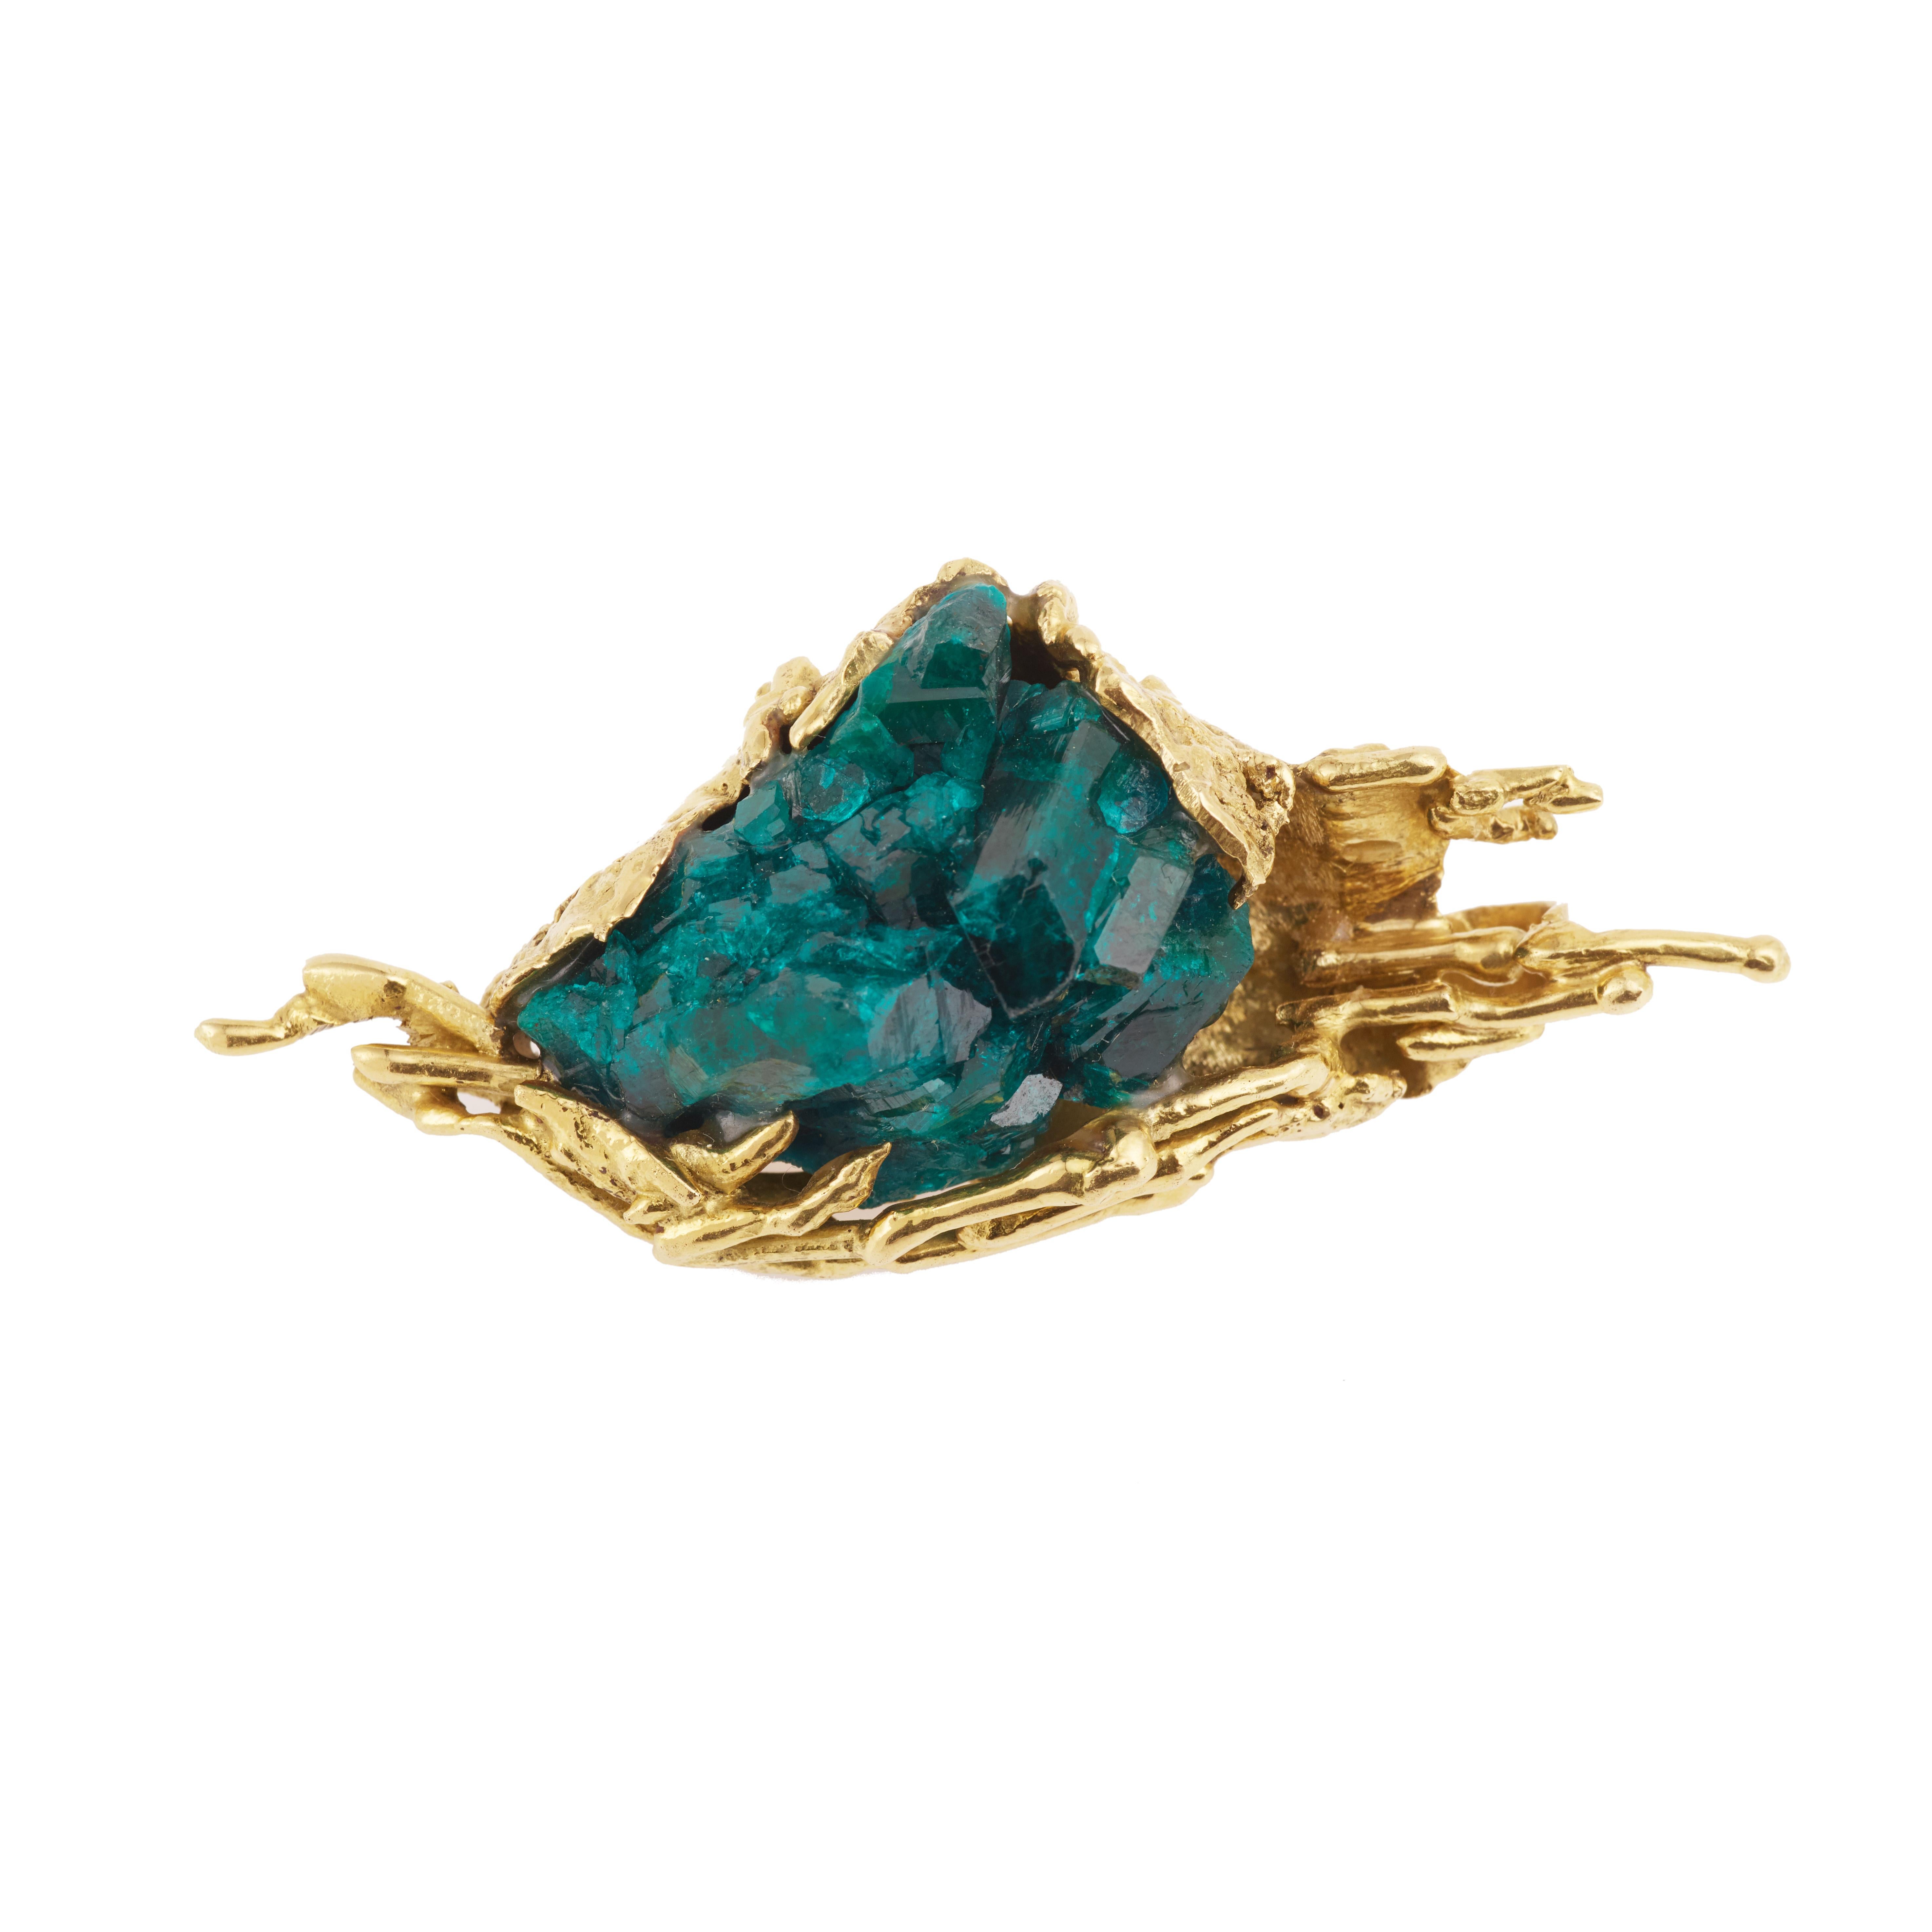 Amazing one of a kind Brooch that can be transformed into a pendant in granite gold, presenting raw dioptase crystals.

Brooch's weight : 33.7 g.

Brooch's dimension : 6.3 x 2.72 x 2 cm ( 2.36 x 0.79 x 0.79 inches)

18 karat yellow gold